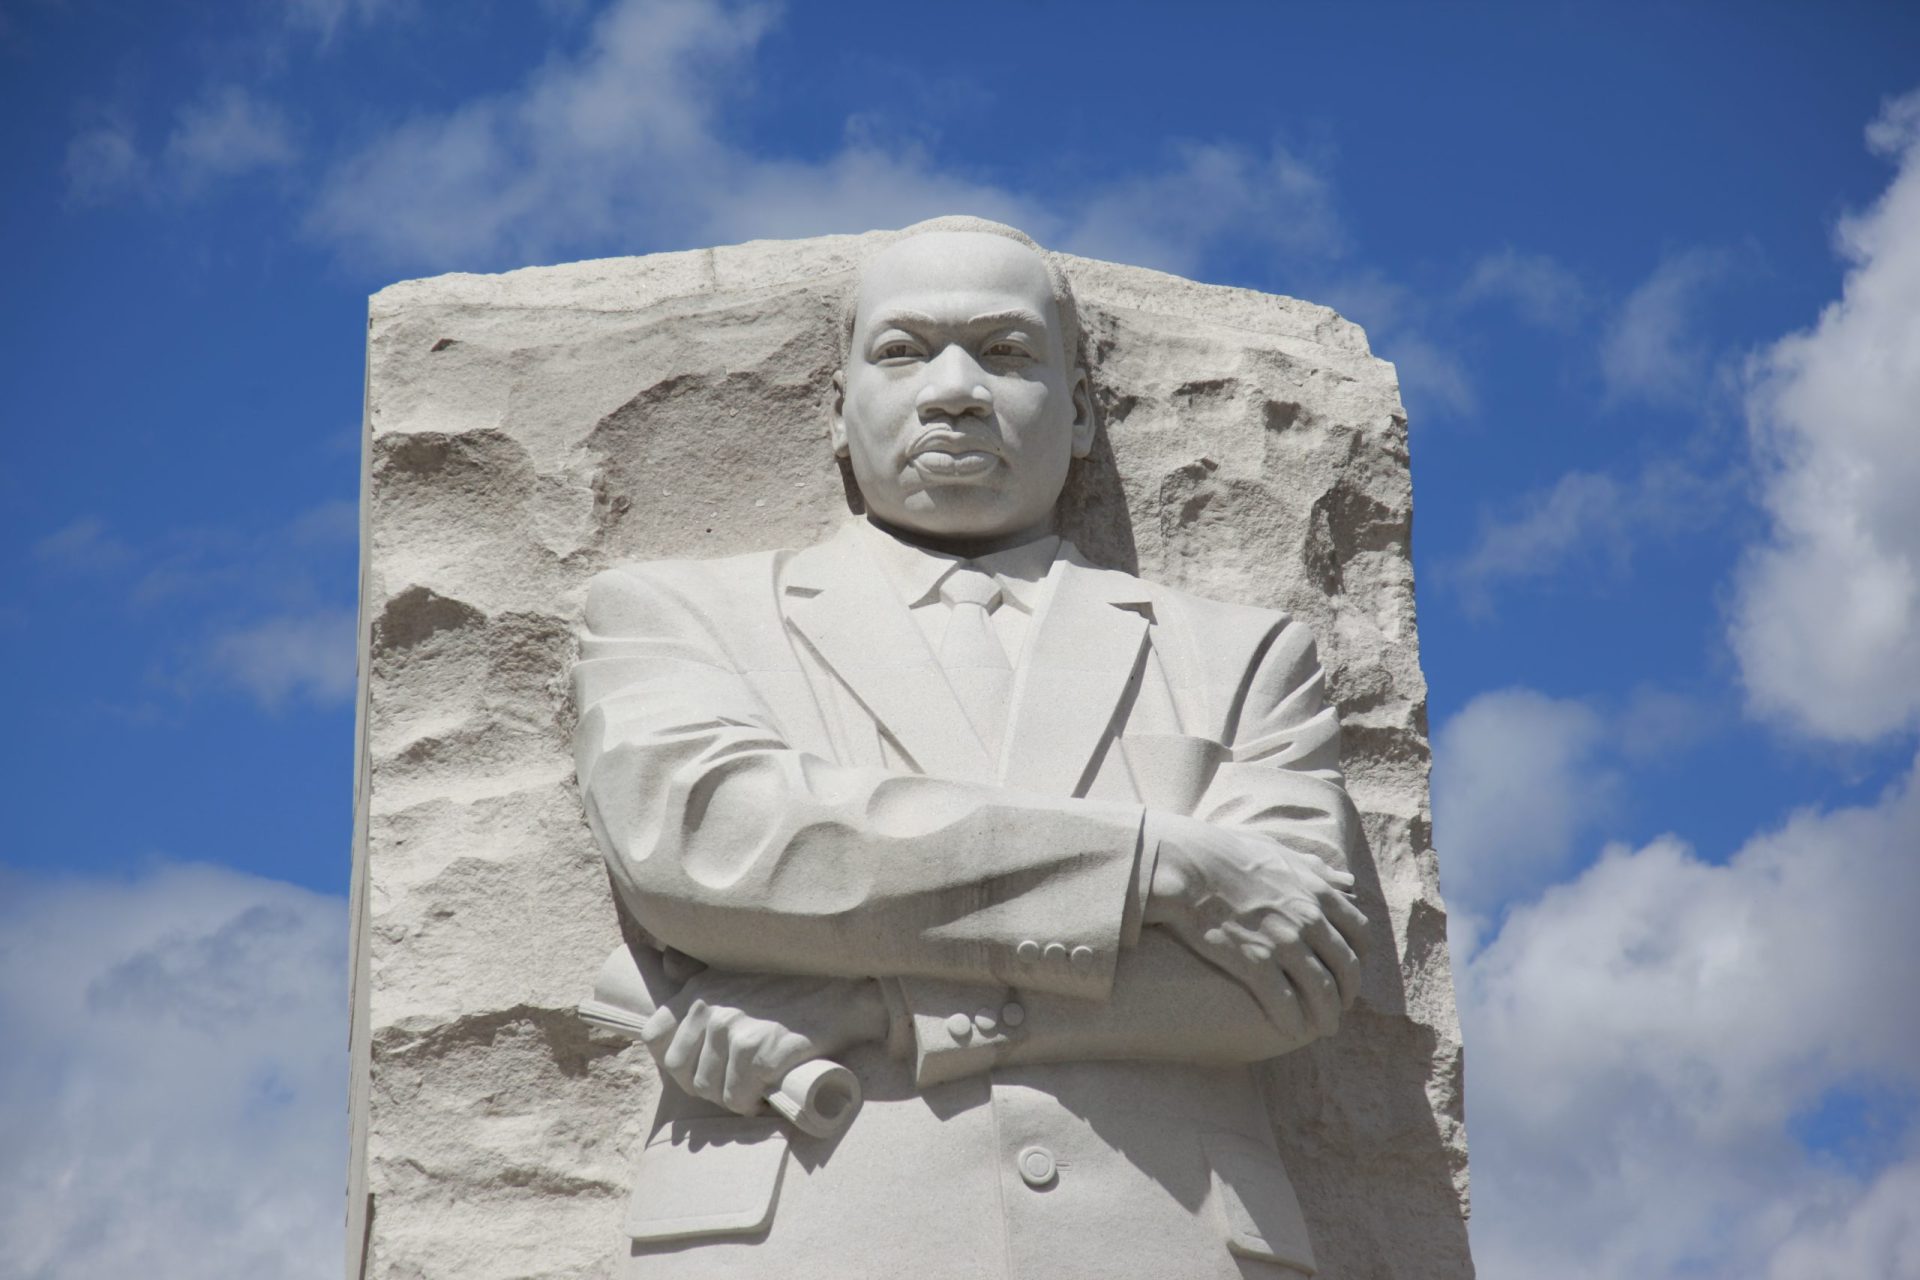 National Black civic group honors MLK on 55th anniversary of his death